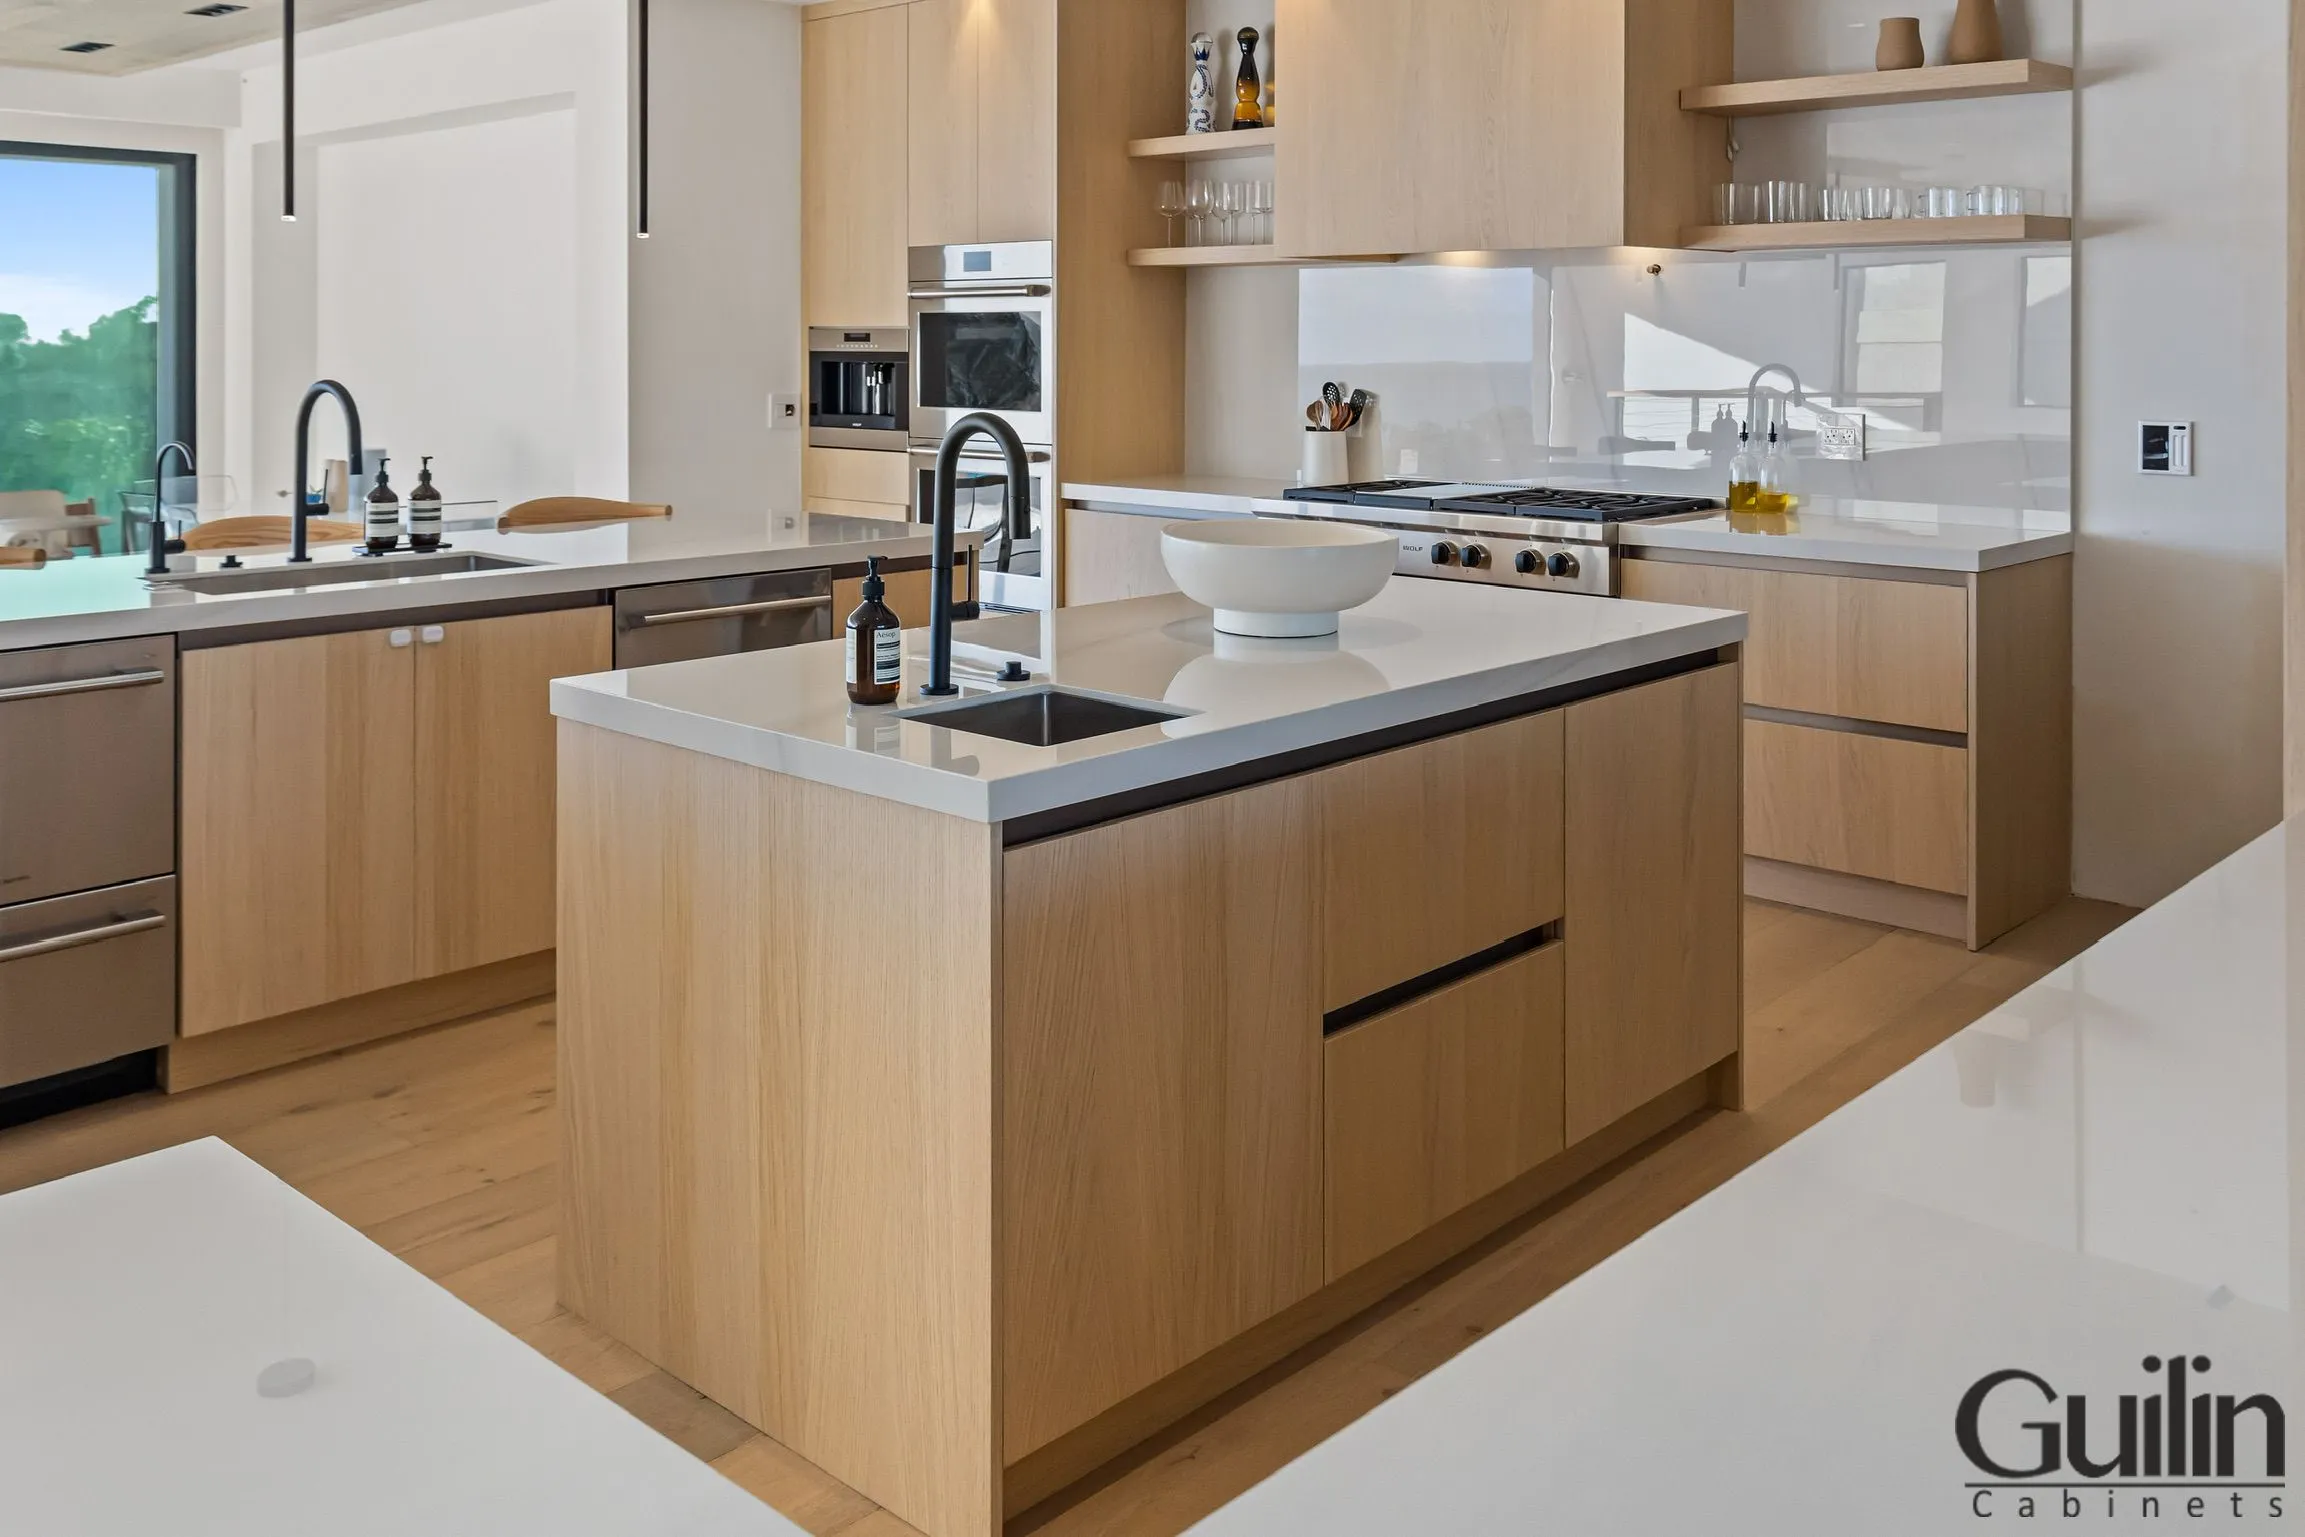 To add this style to your kitchen, one of the easiest ways is to reface your kitchen cabinets. This involves changing out the cabinet doors for something that is sleek, modern, and hands-free.